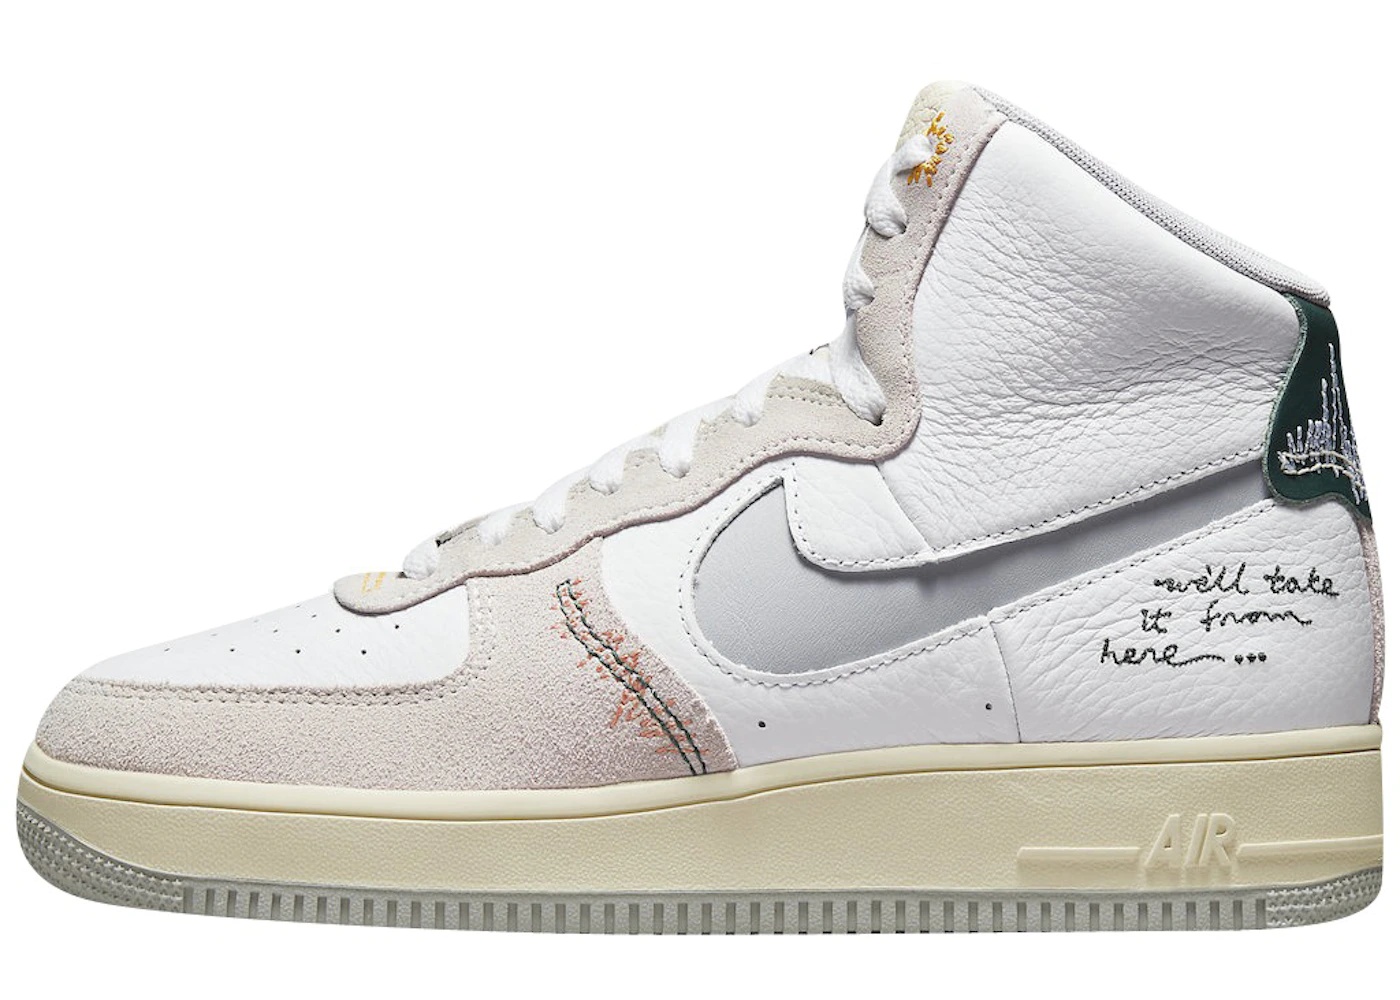 Nike Air Force 1 High Sculpt We'll Take It From Here (W) - 1